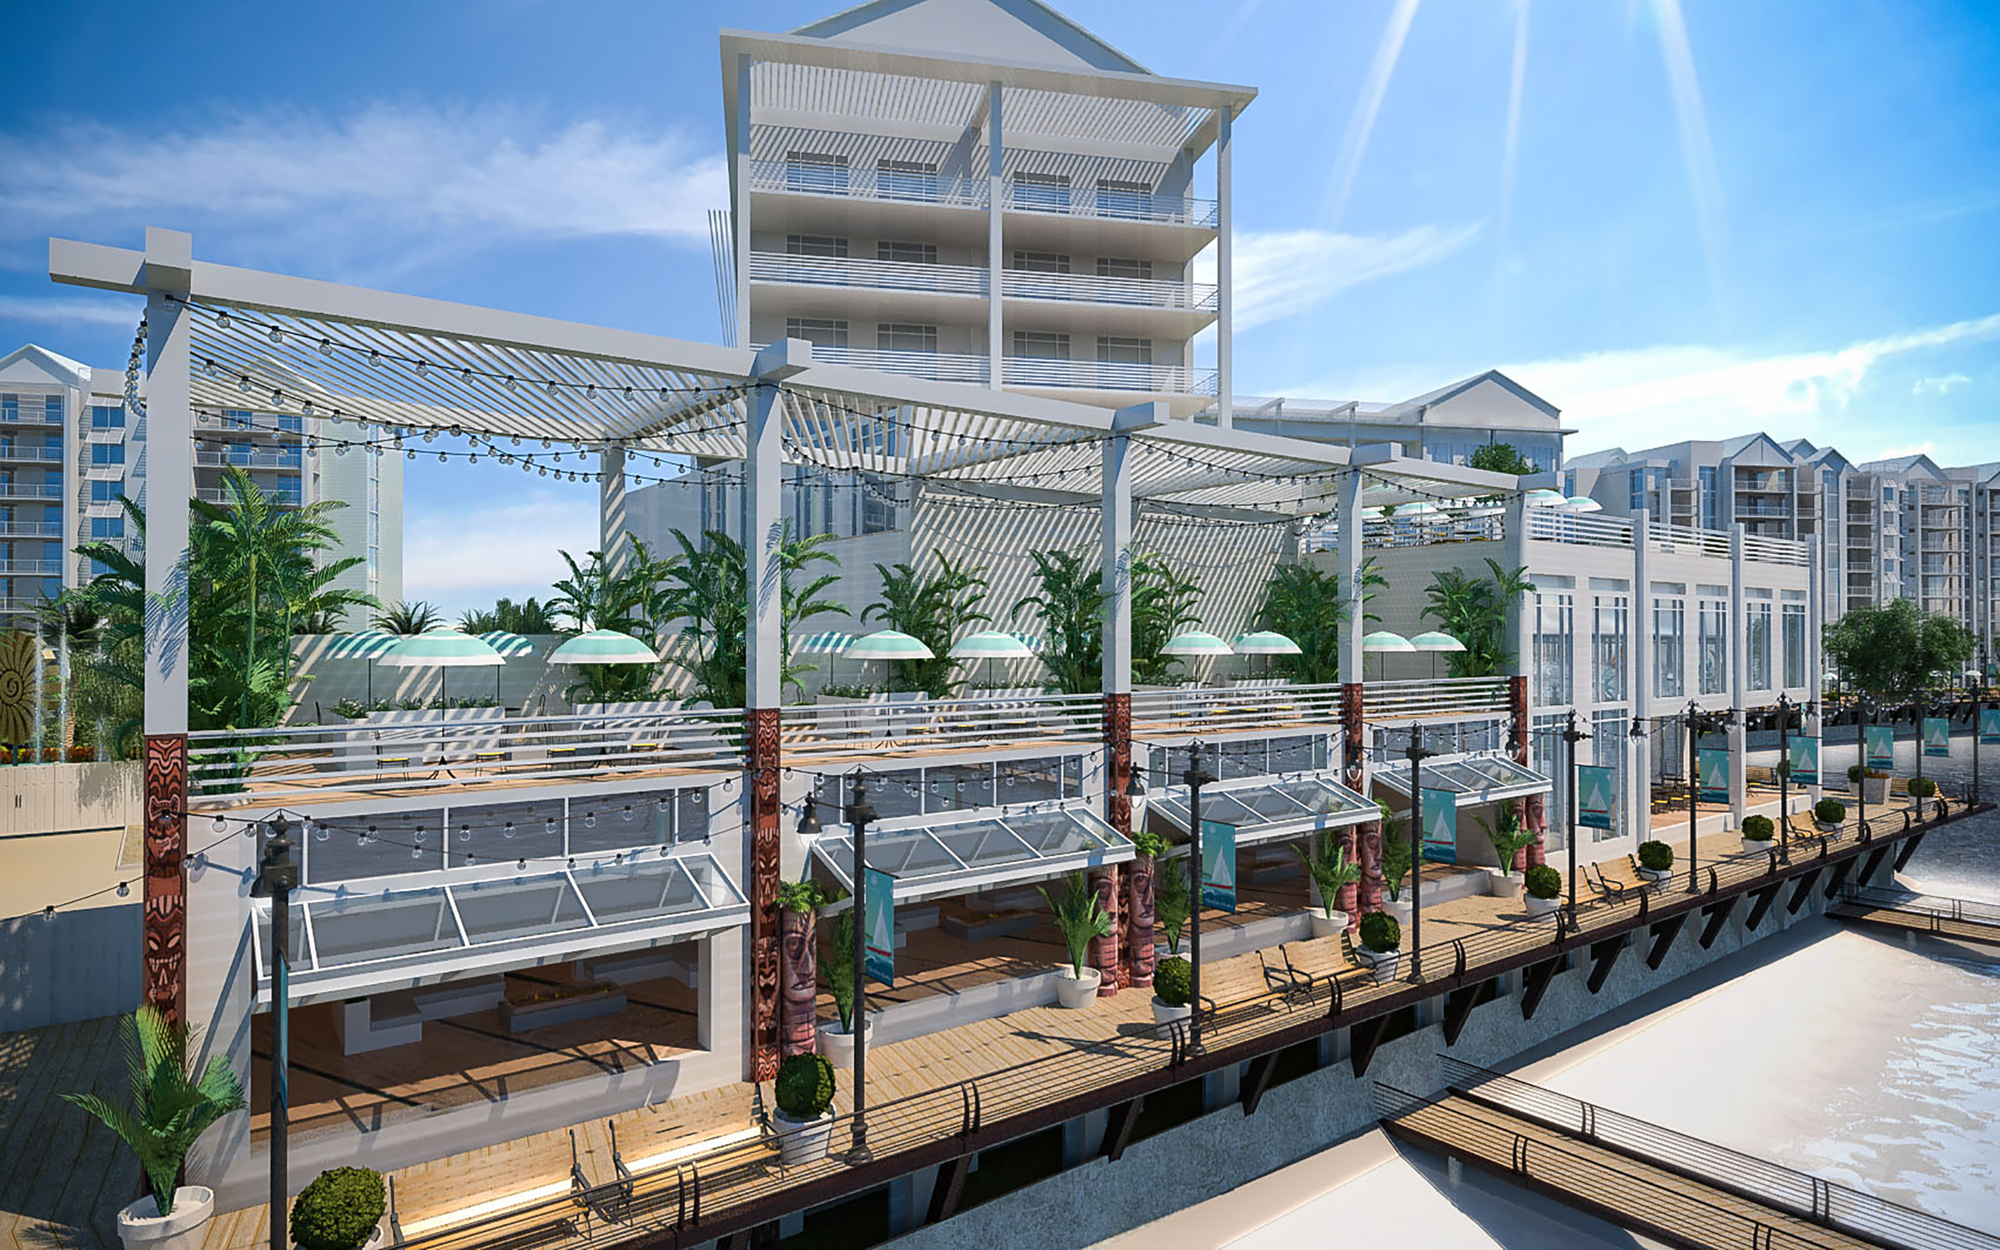 Restaurants and bars along the Sunseeker boardwalk will be available to the public as well as resort guests. Courtesy Sunseeker Resorts